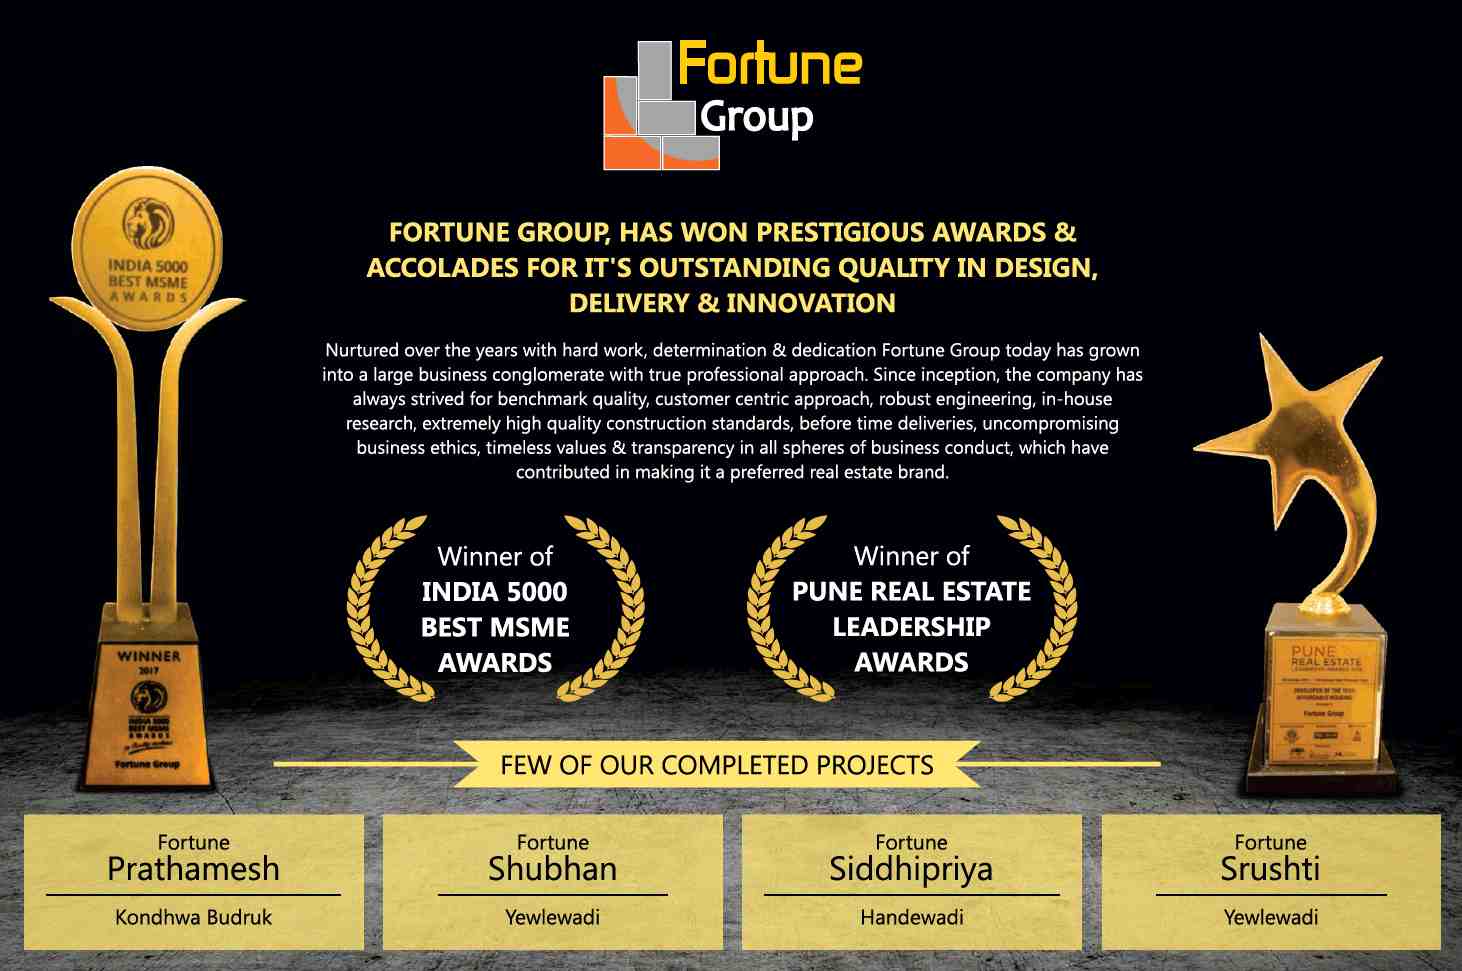 Fortune Group won prestigious awards for it's outstanding quality in design, delivery & innovation